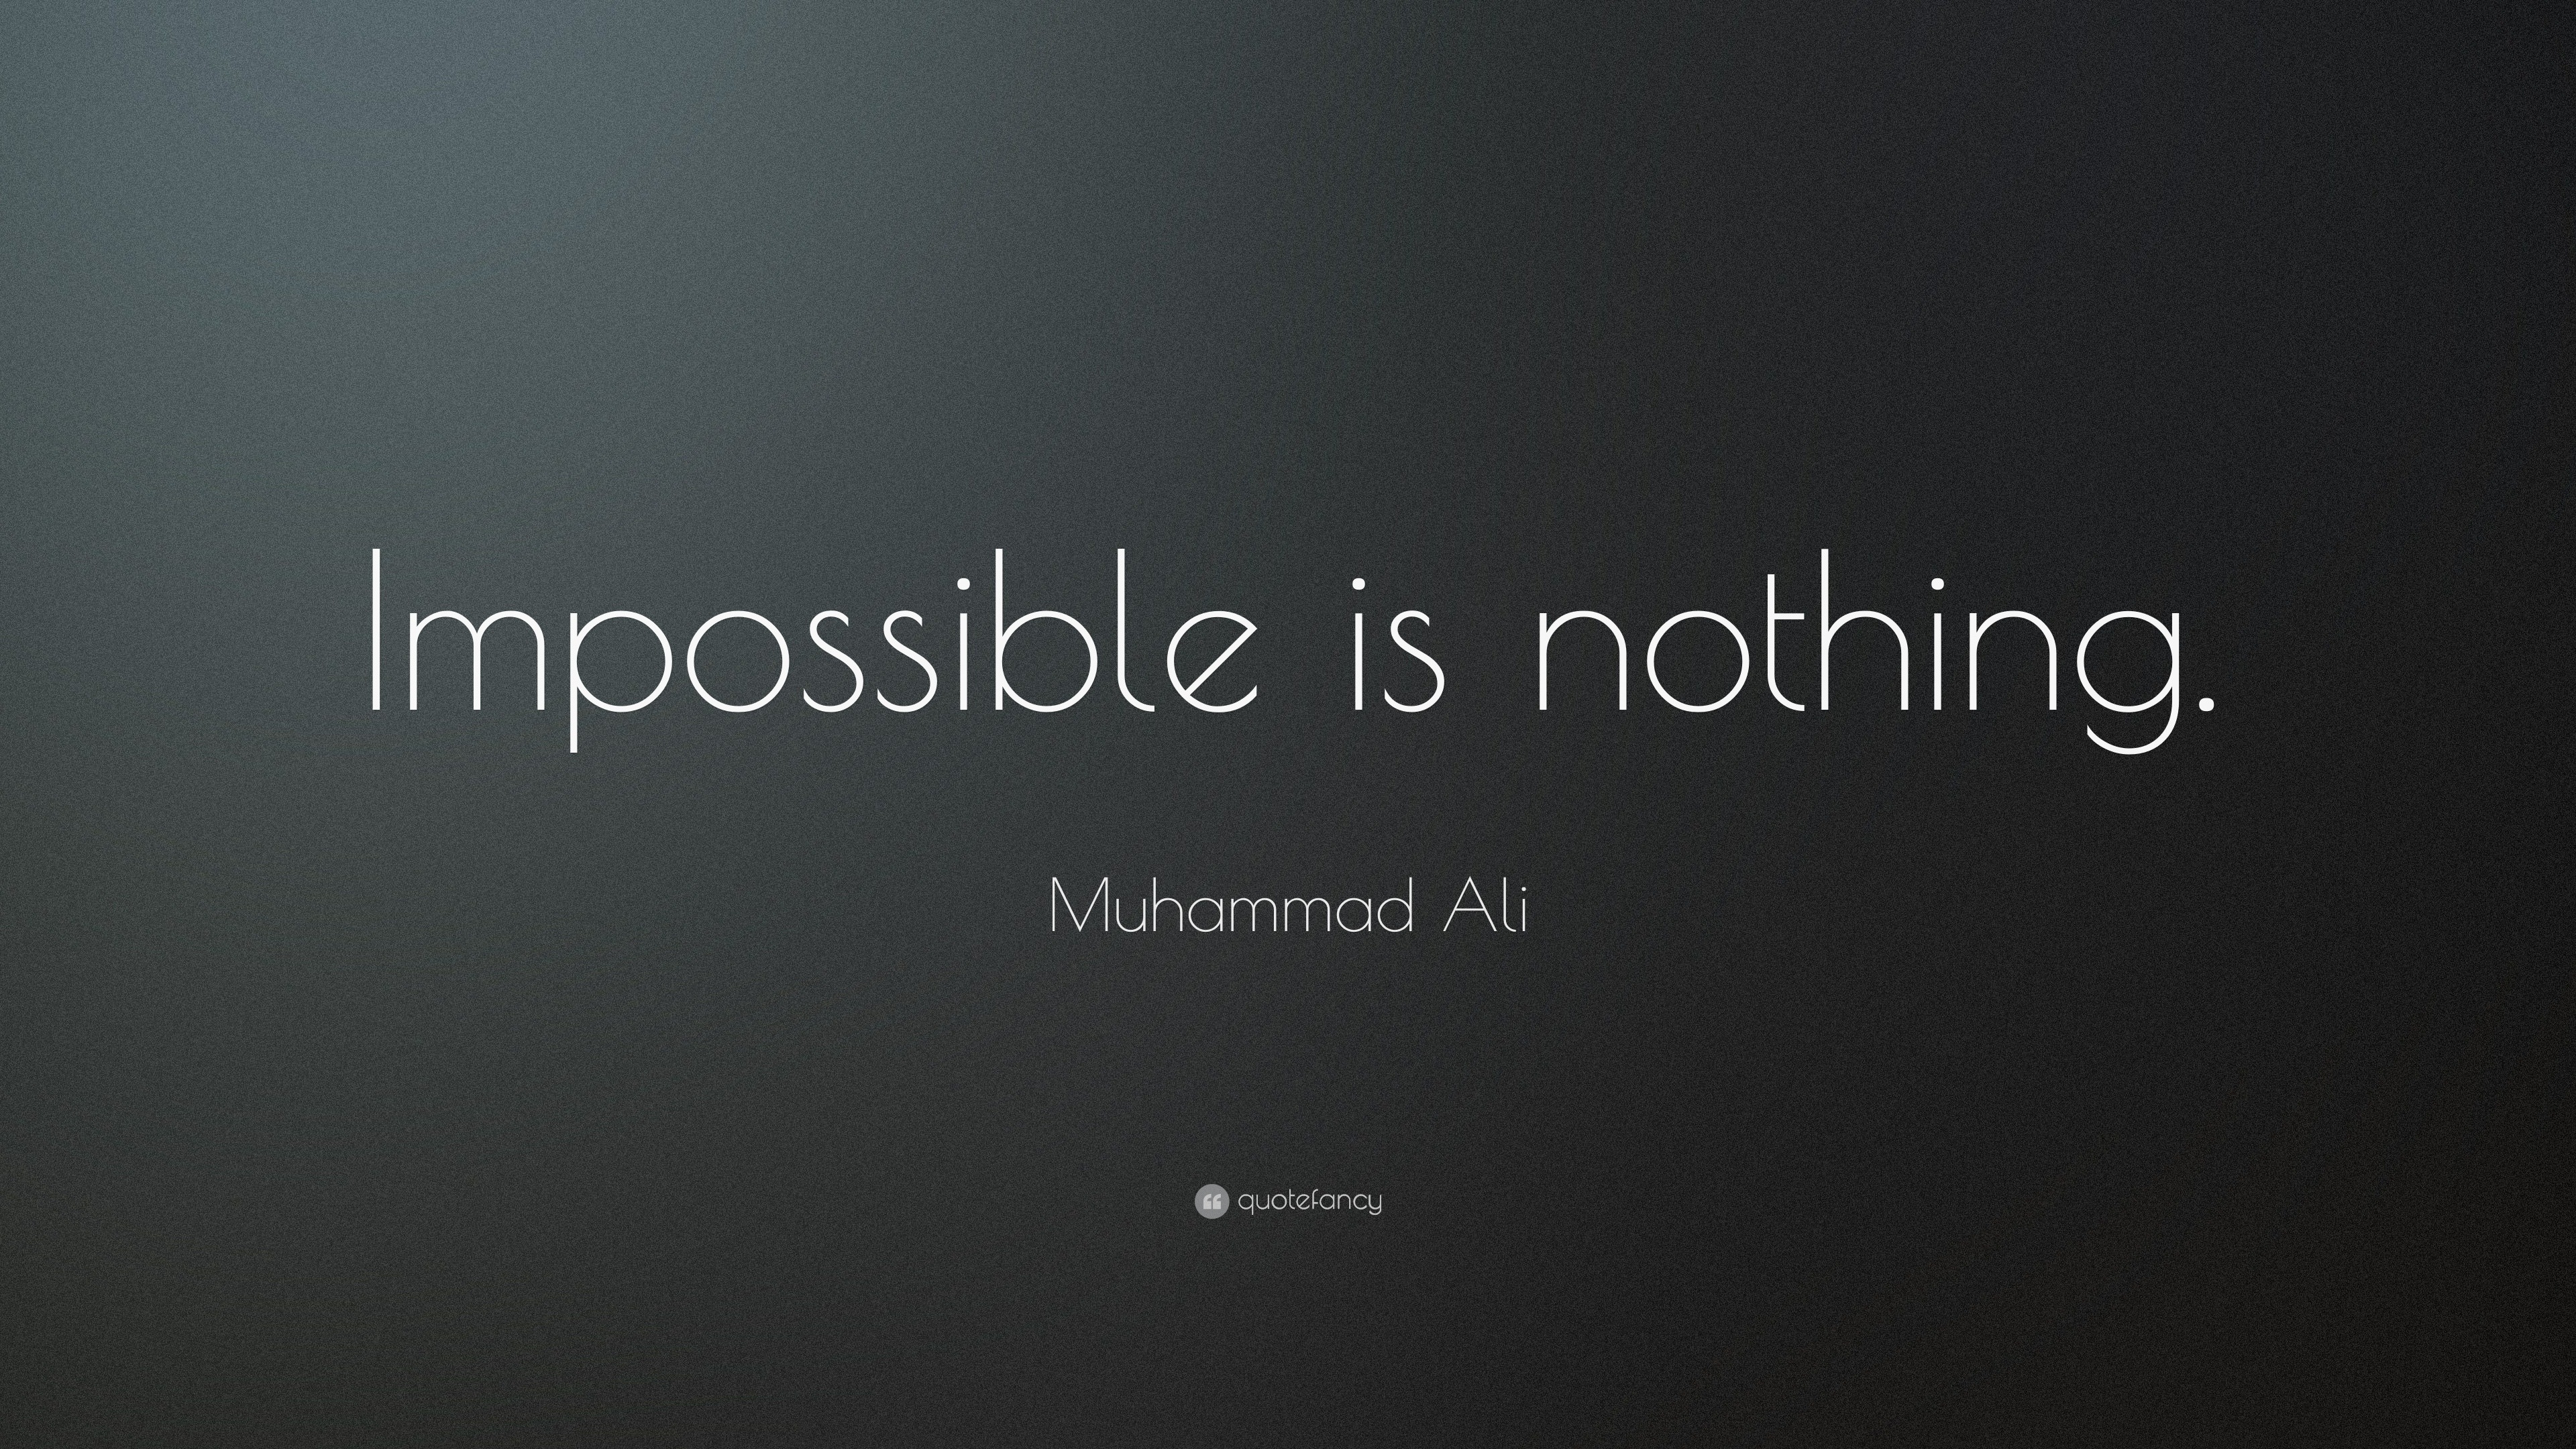 Muhammad Ali Quote: “Impossible Is Nothing.”